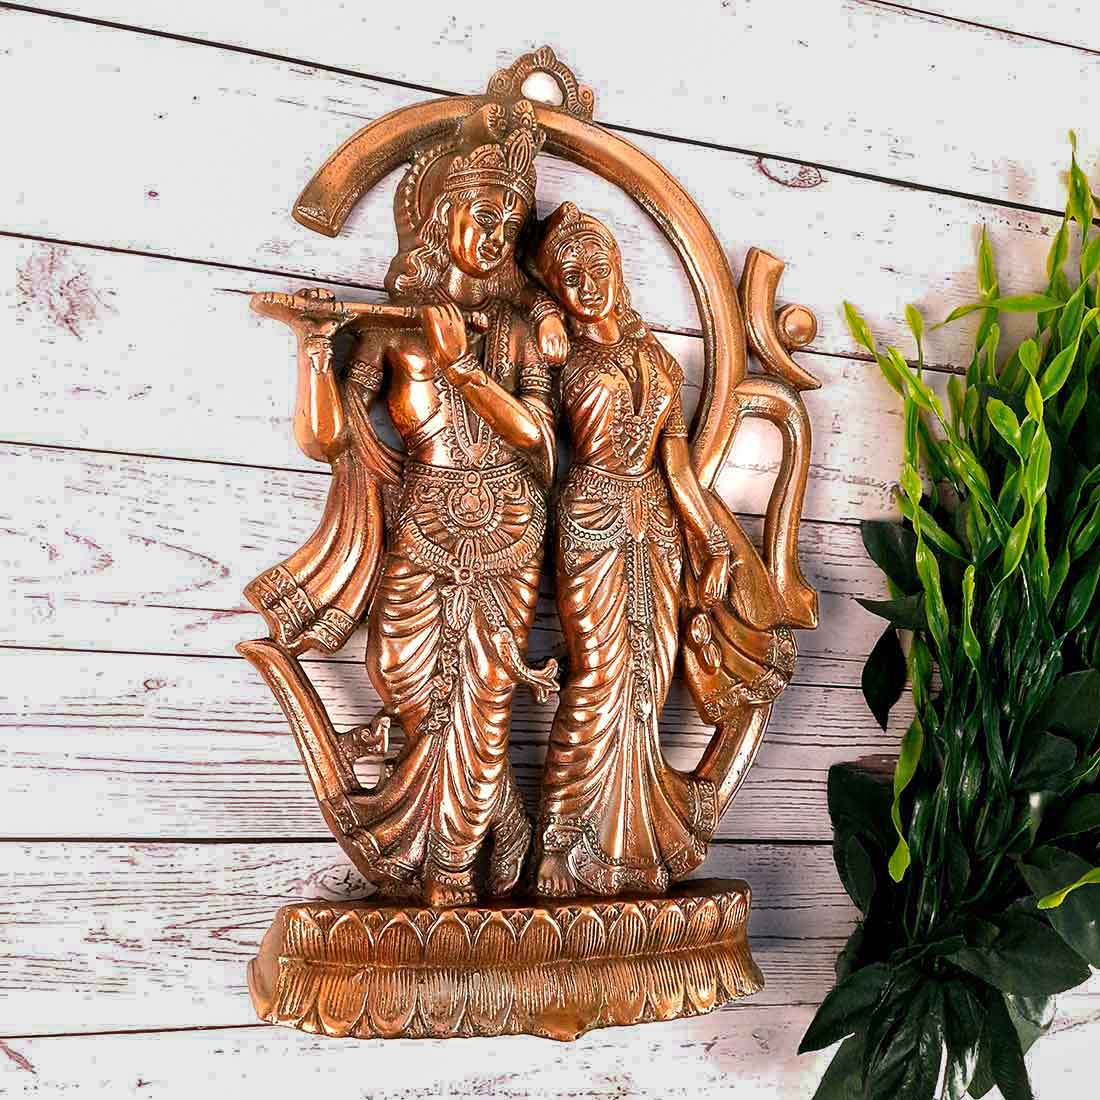 Buy ascension Krishna Murti Flute Playing Krishna Statue Vastu Religious  Figurine for Mandir, Living Room, Office Table and Home Decor Tabletop Gift  Item Online at Low Prices in India - Amazon.in